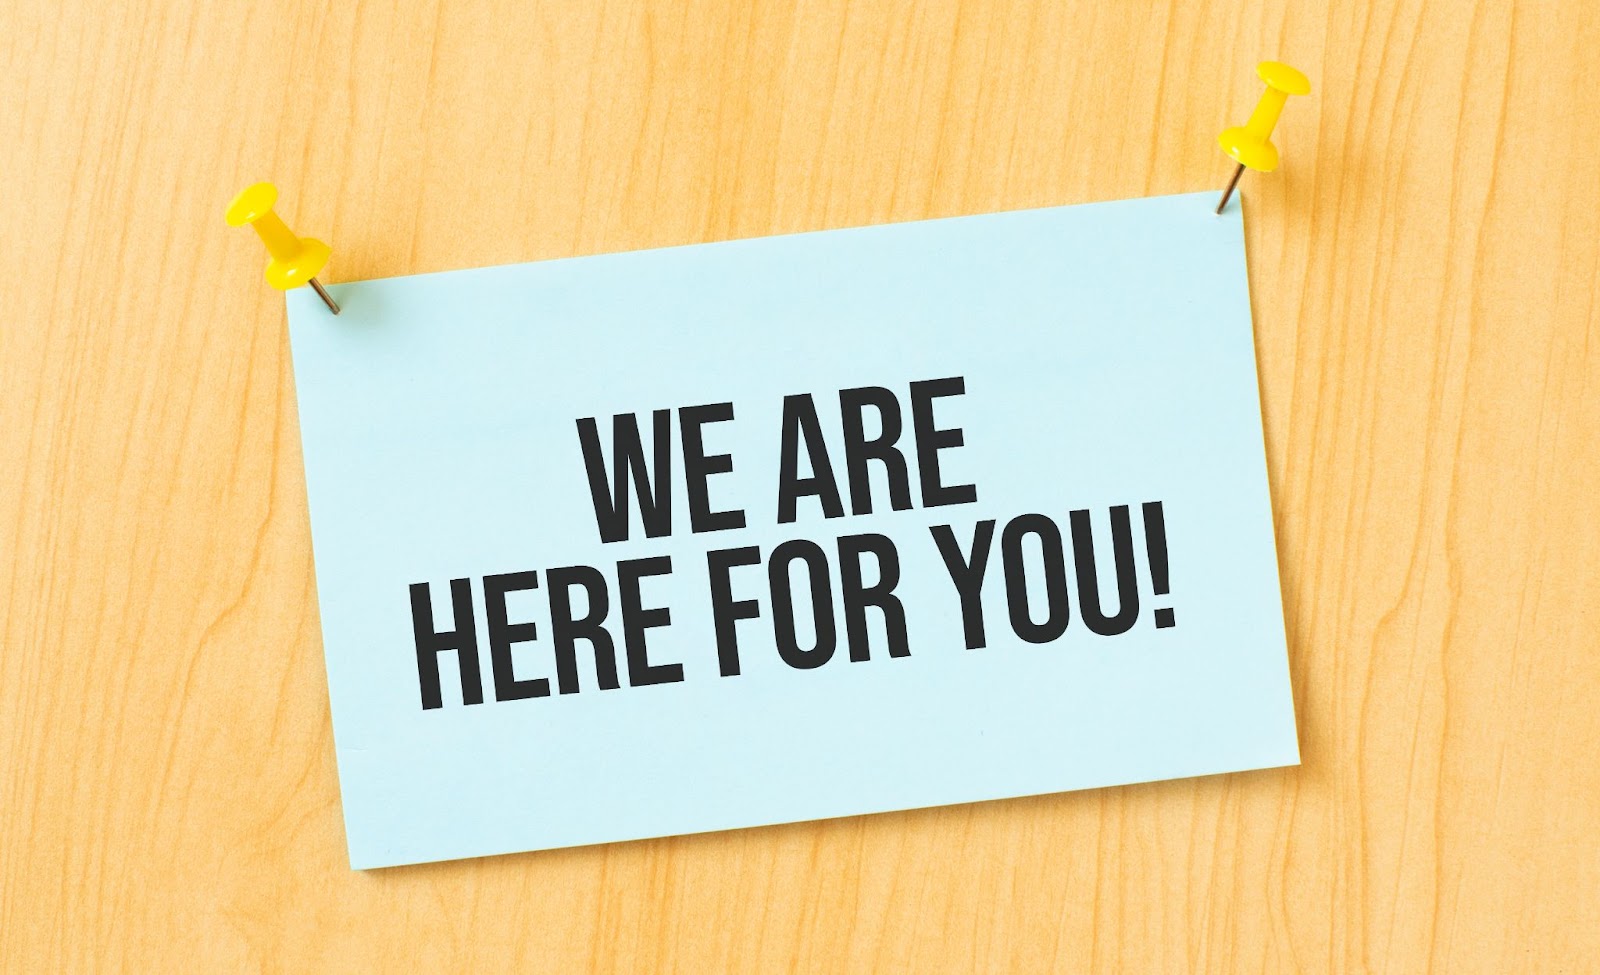 We are here for you!